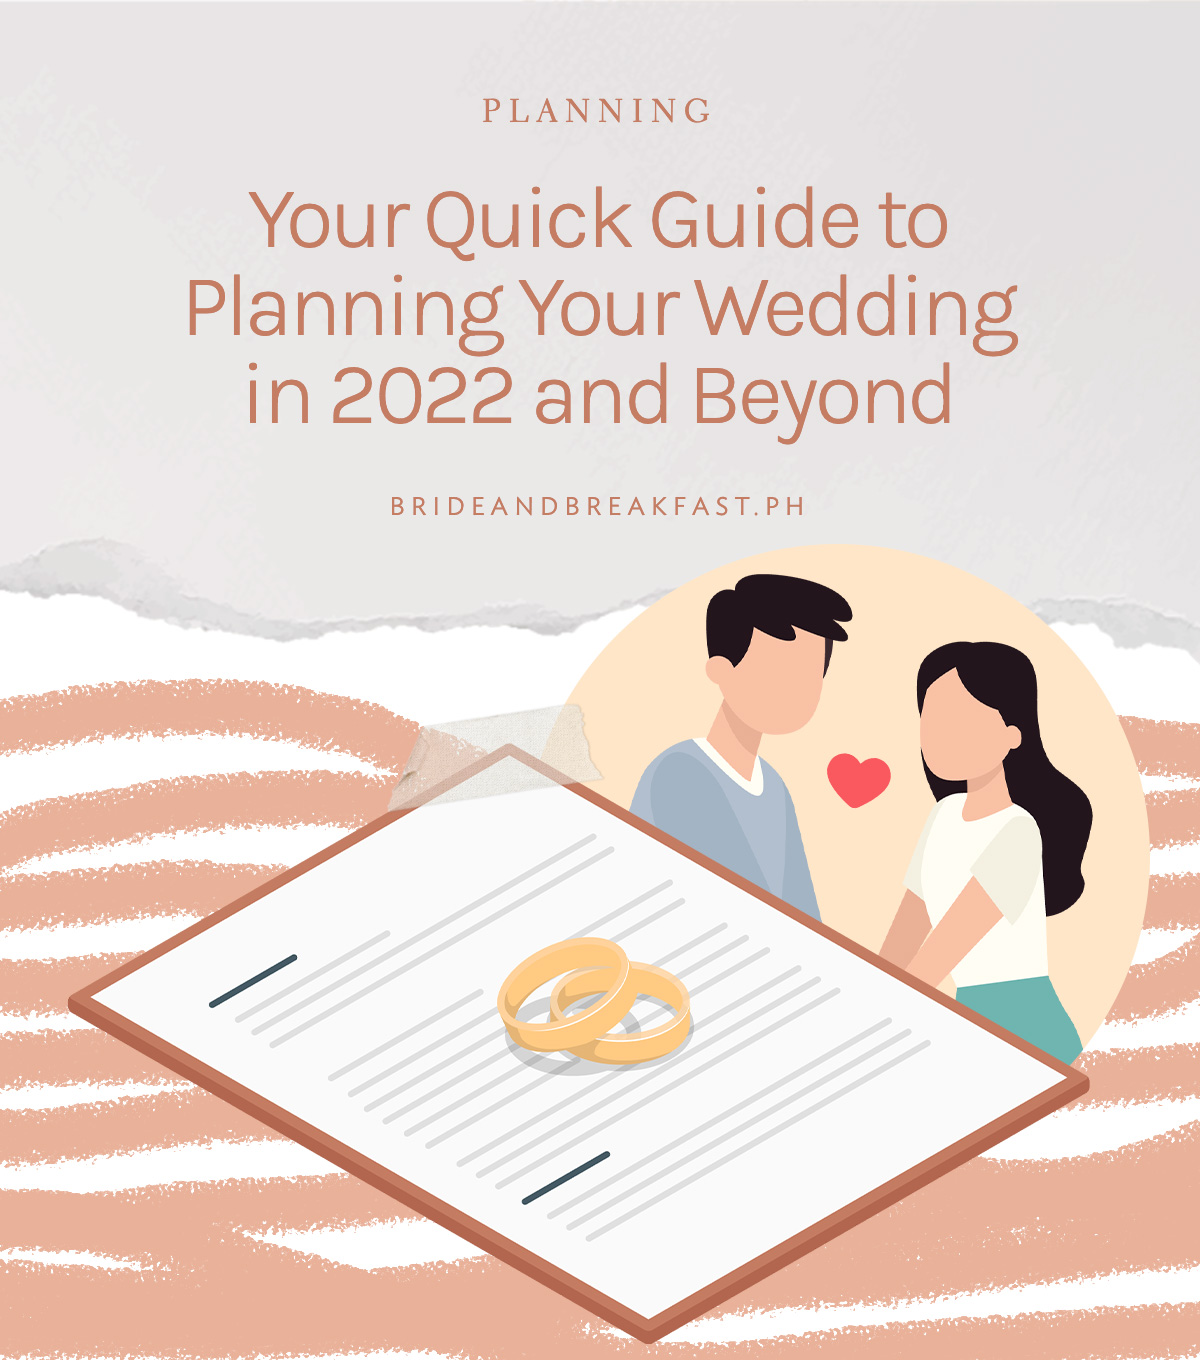 Your Quick Guide to Planning Your Wedding in 2022 and Beyond